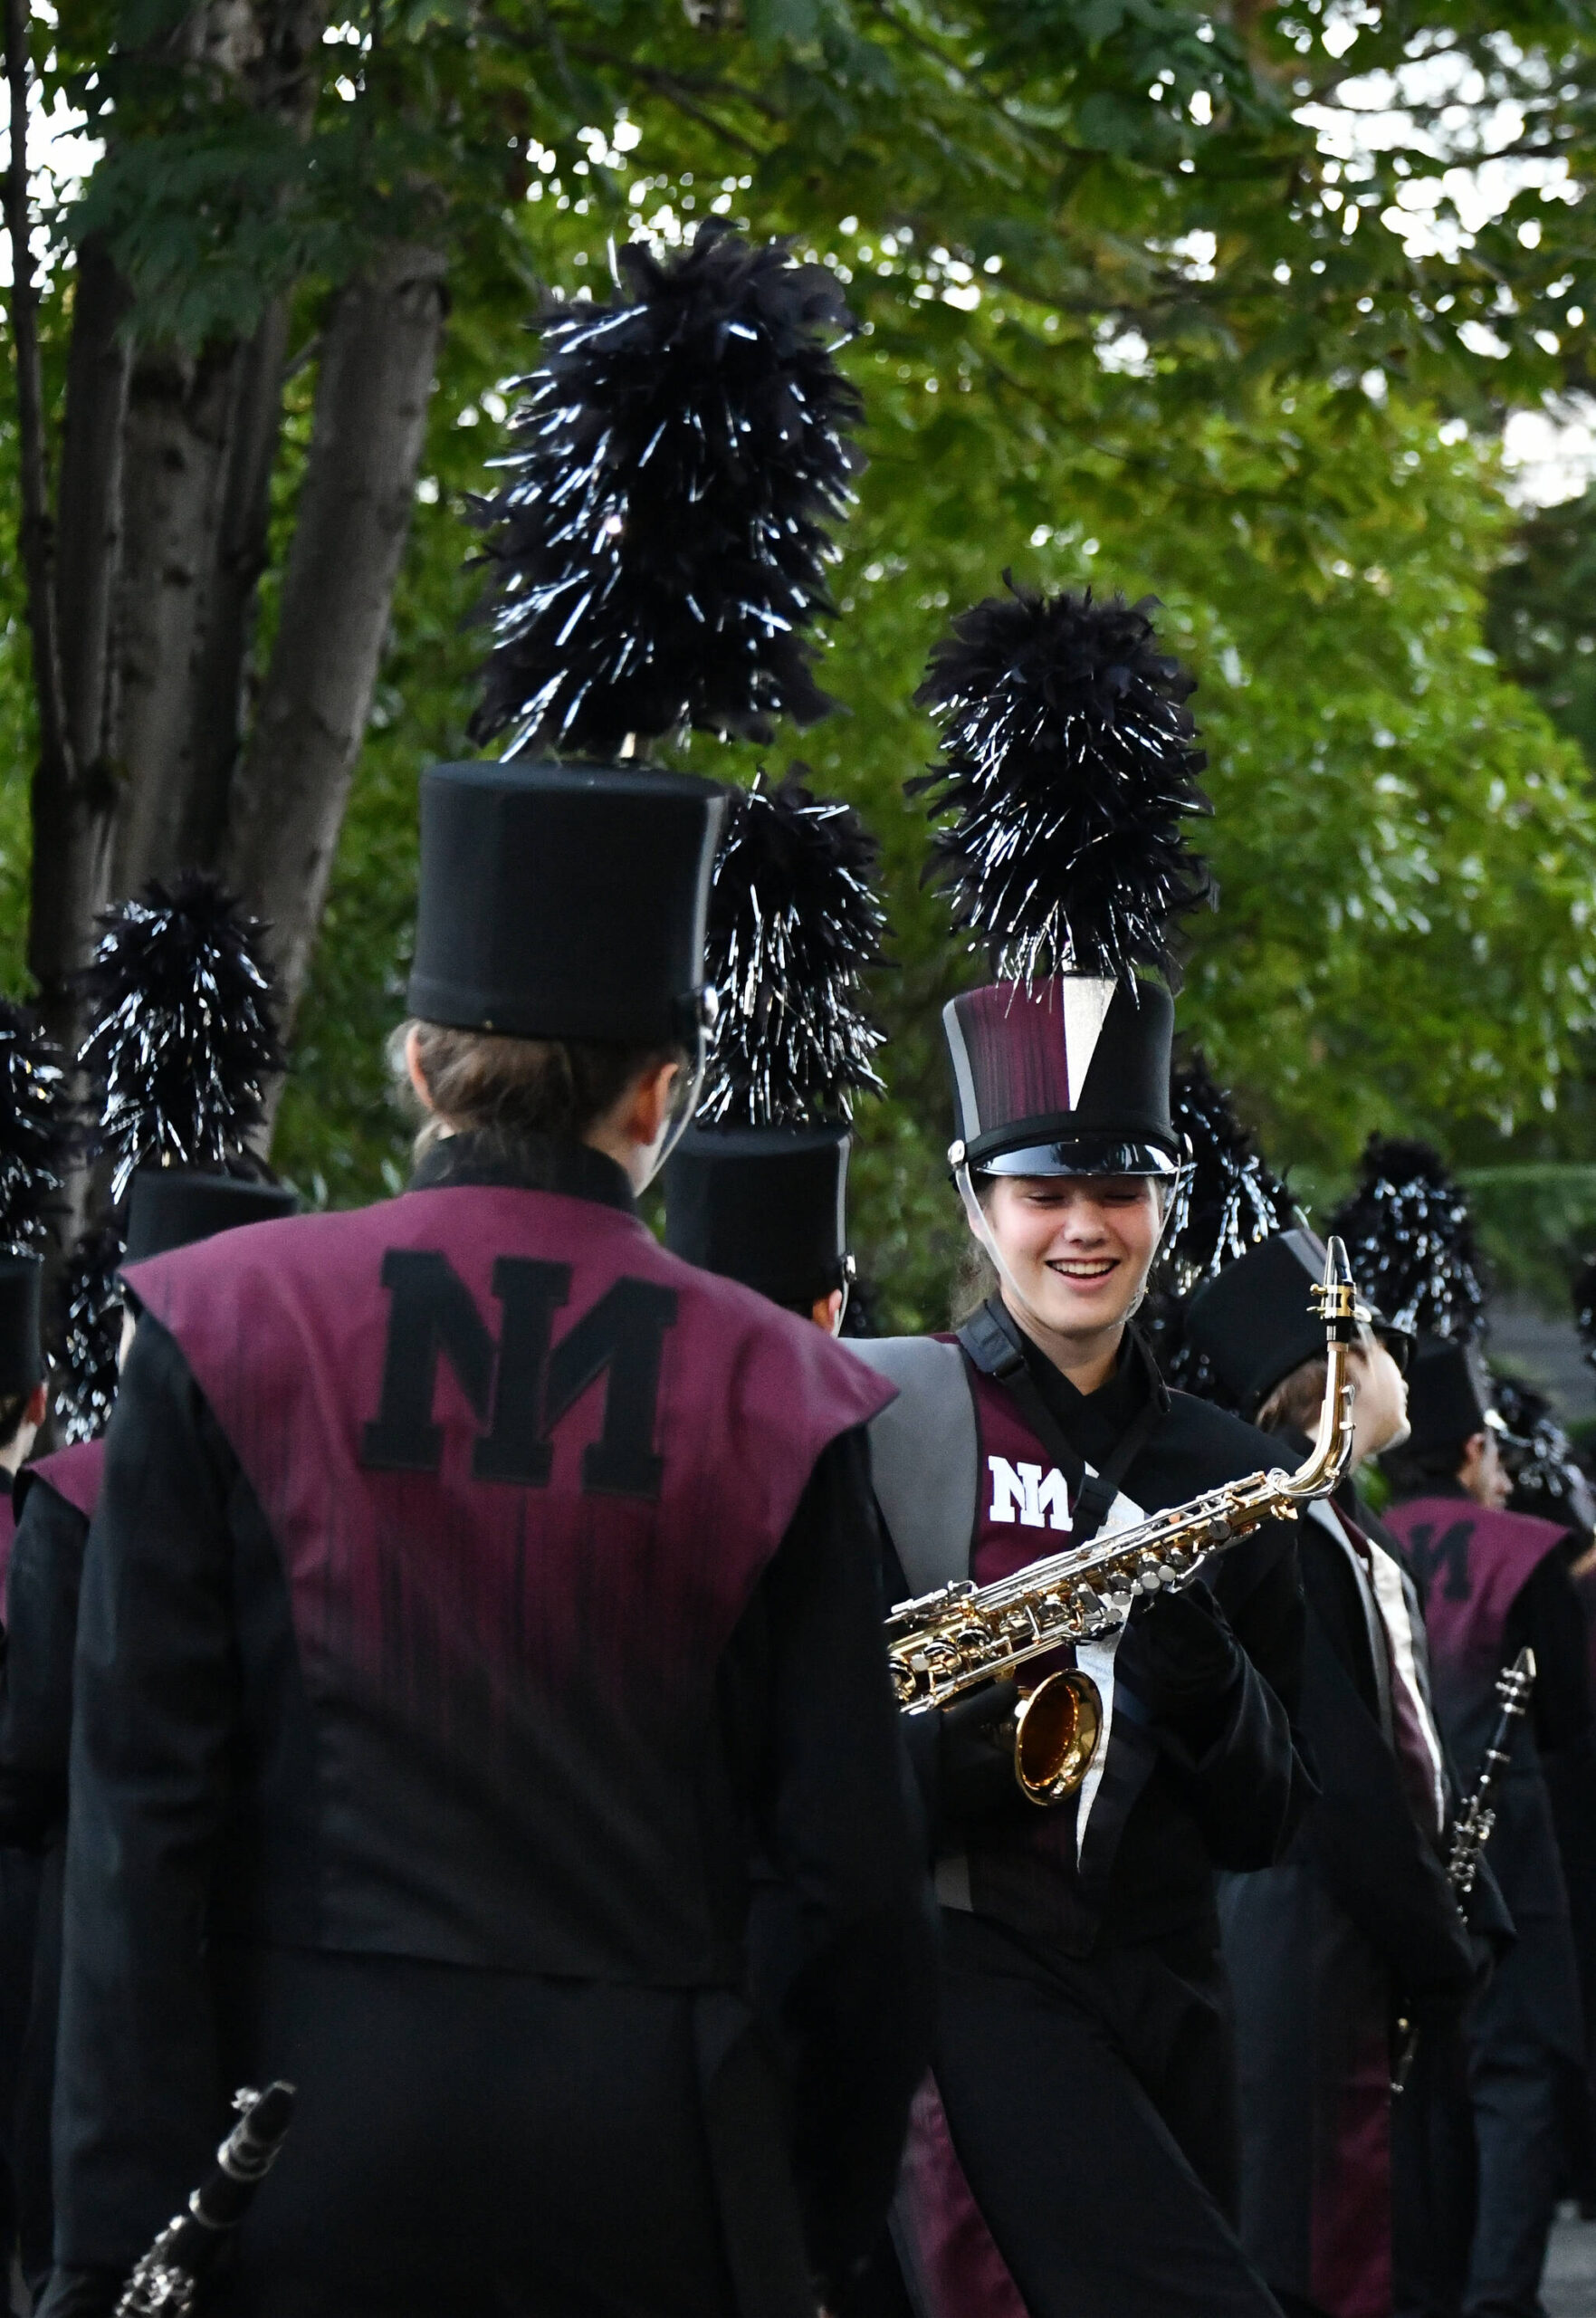 Band time is fun time at the Oct. 12 full dress rehearsal. Andy Nystrom/ staff photo